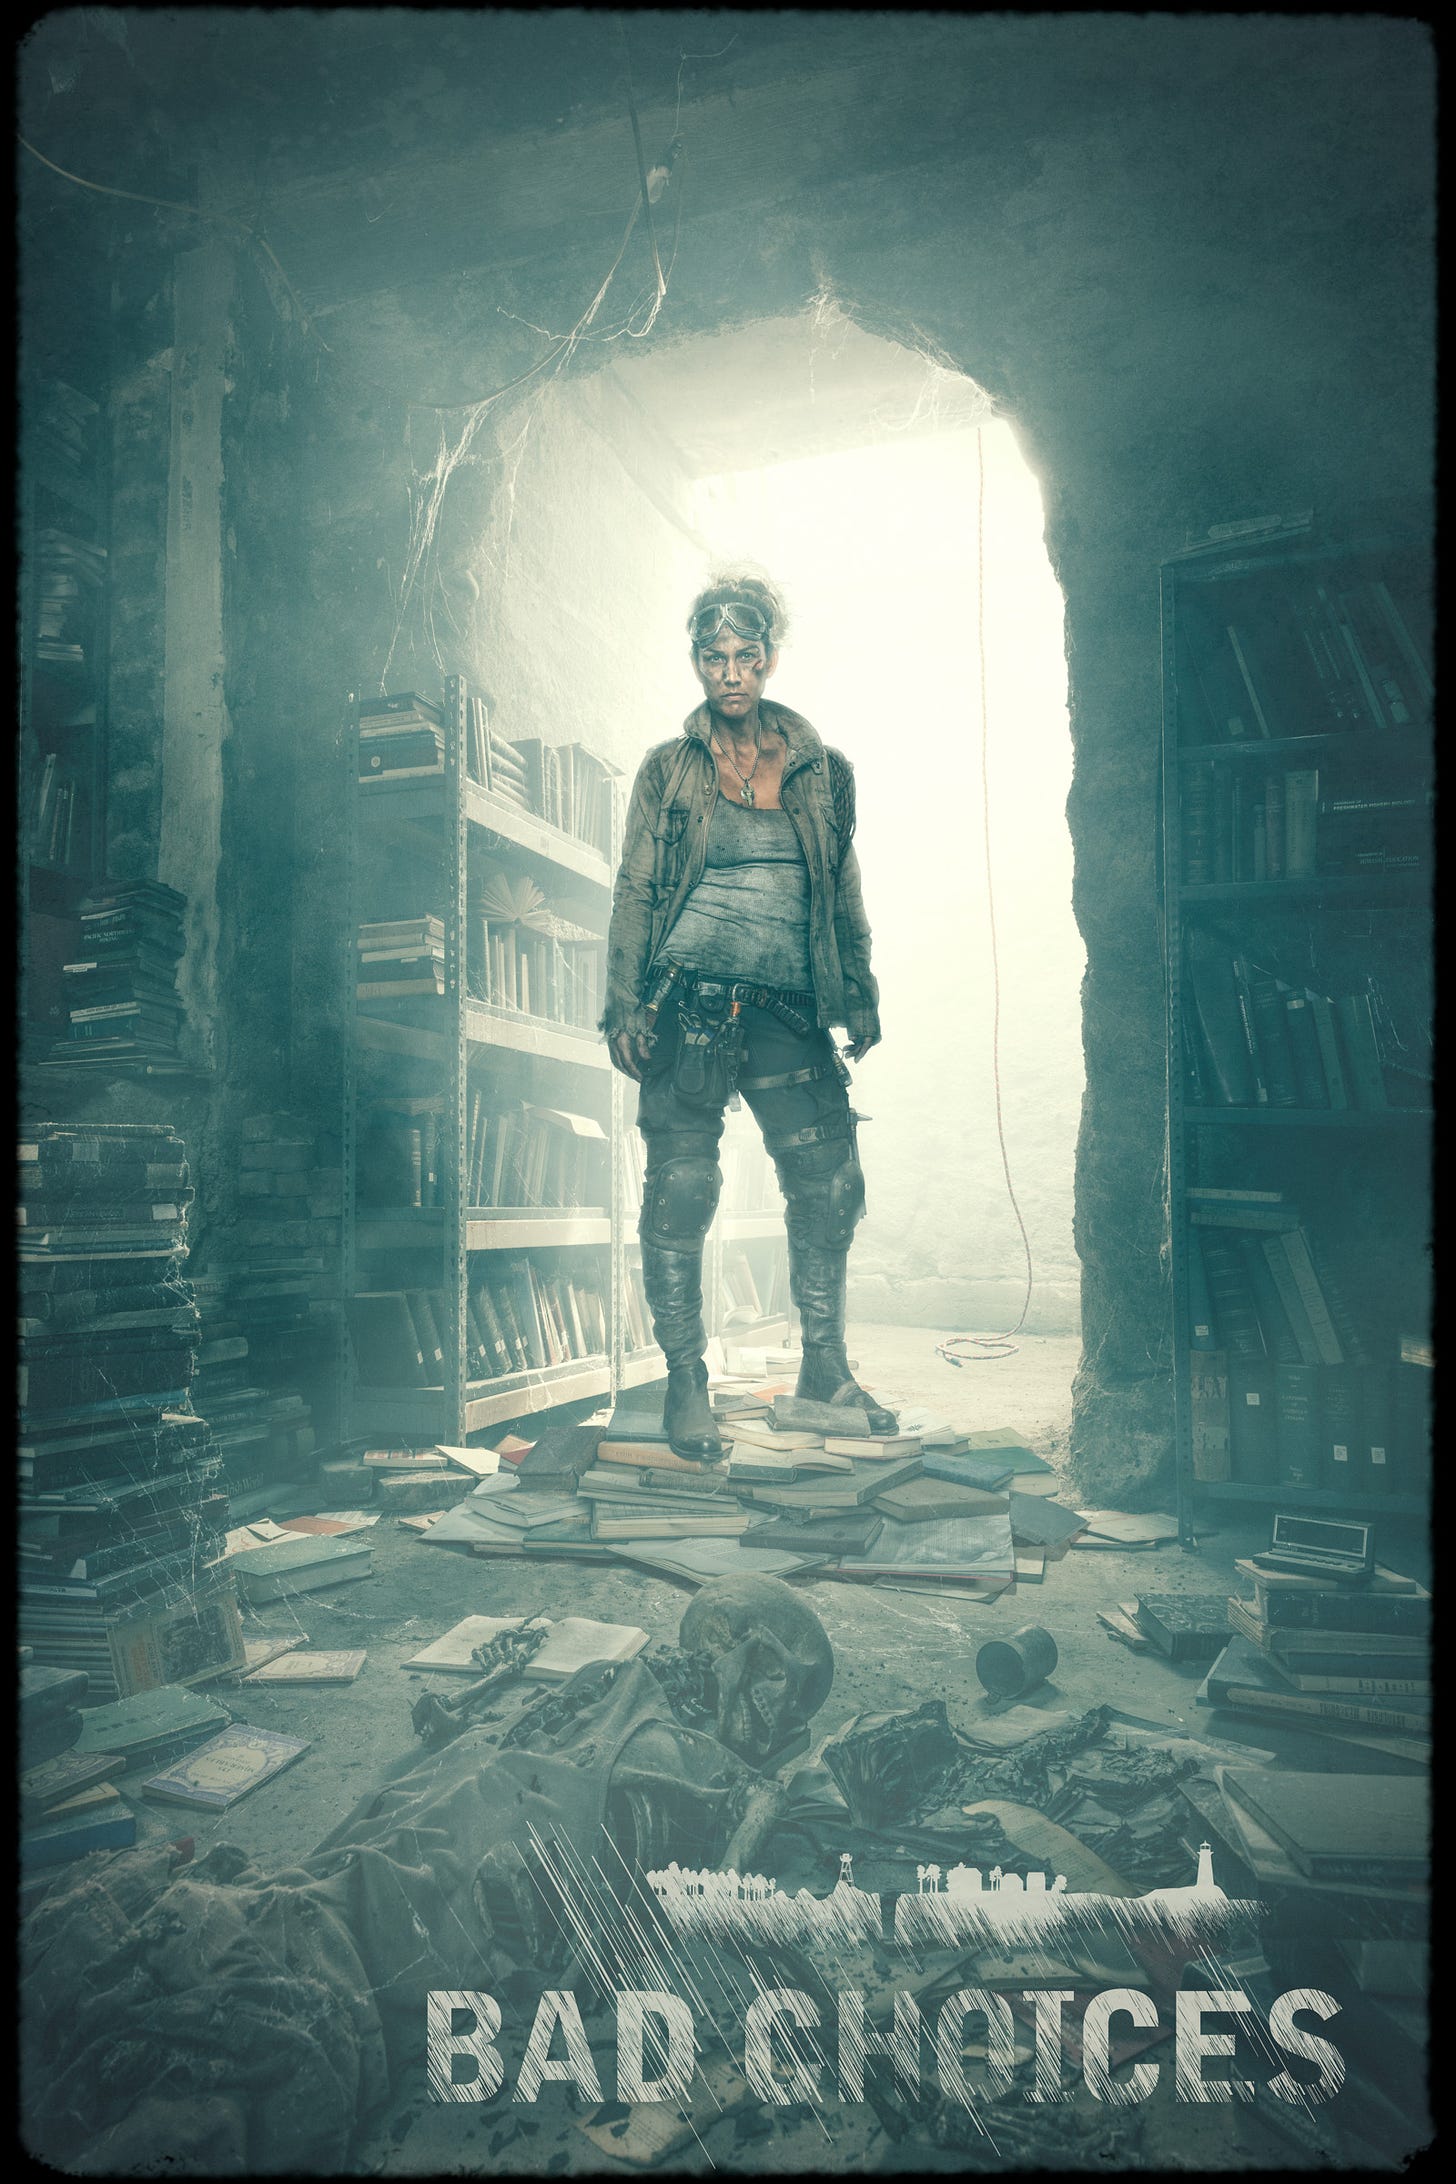 Turner is one of the characters featured in the Bad Choices Project. She has fallen into a hidden library bunker filled with old books and a skeleton.